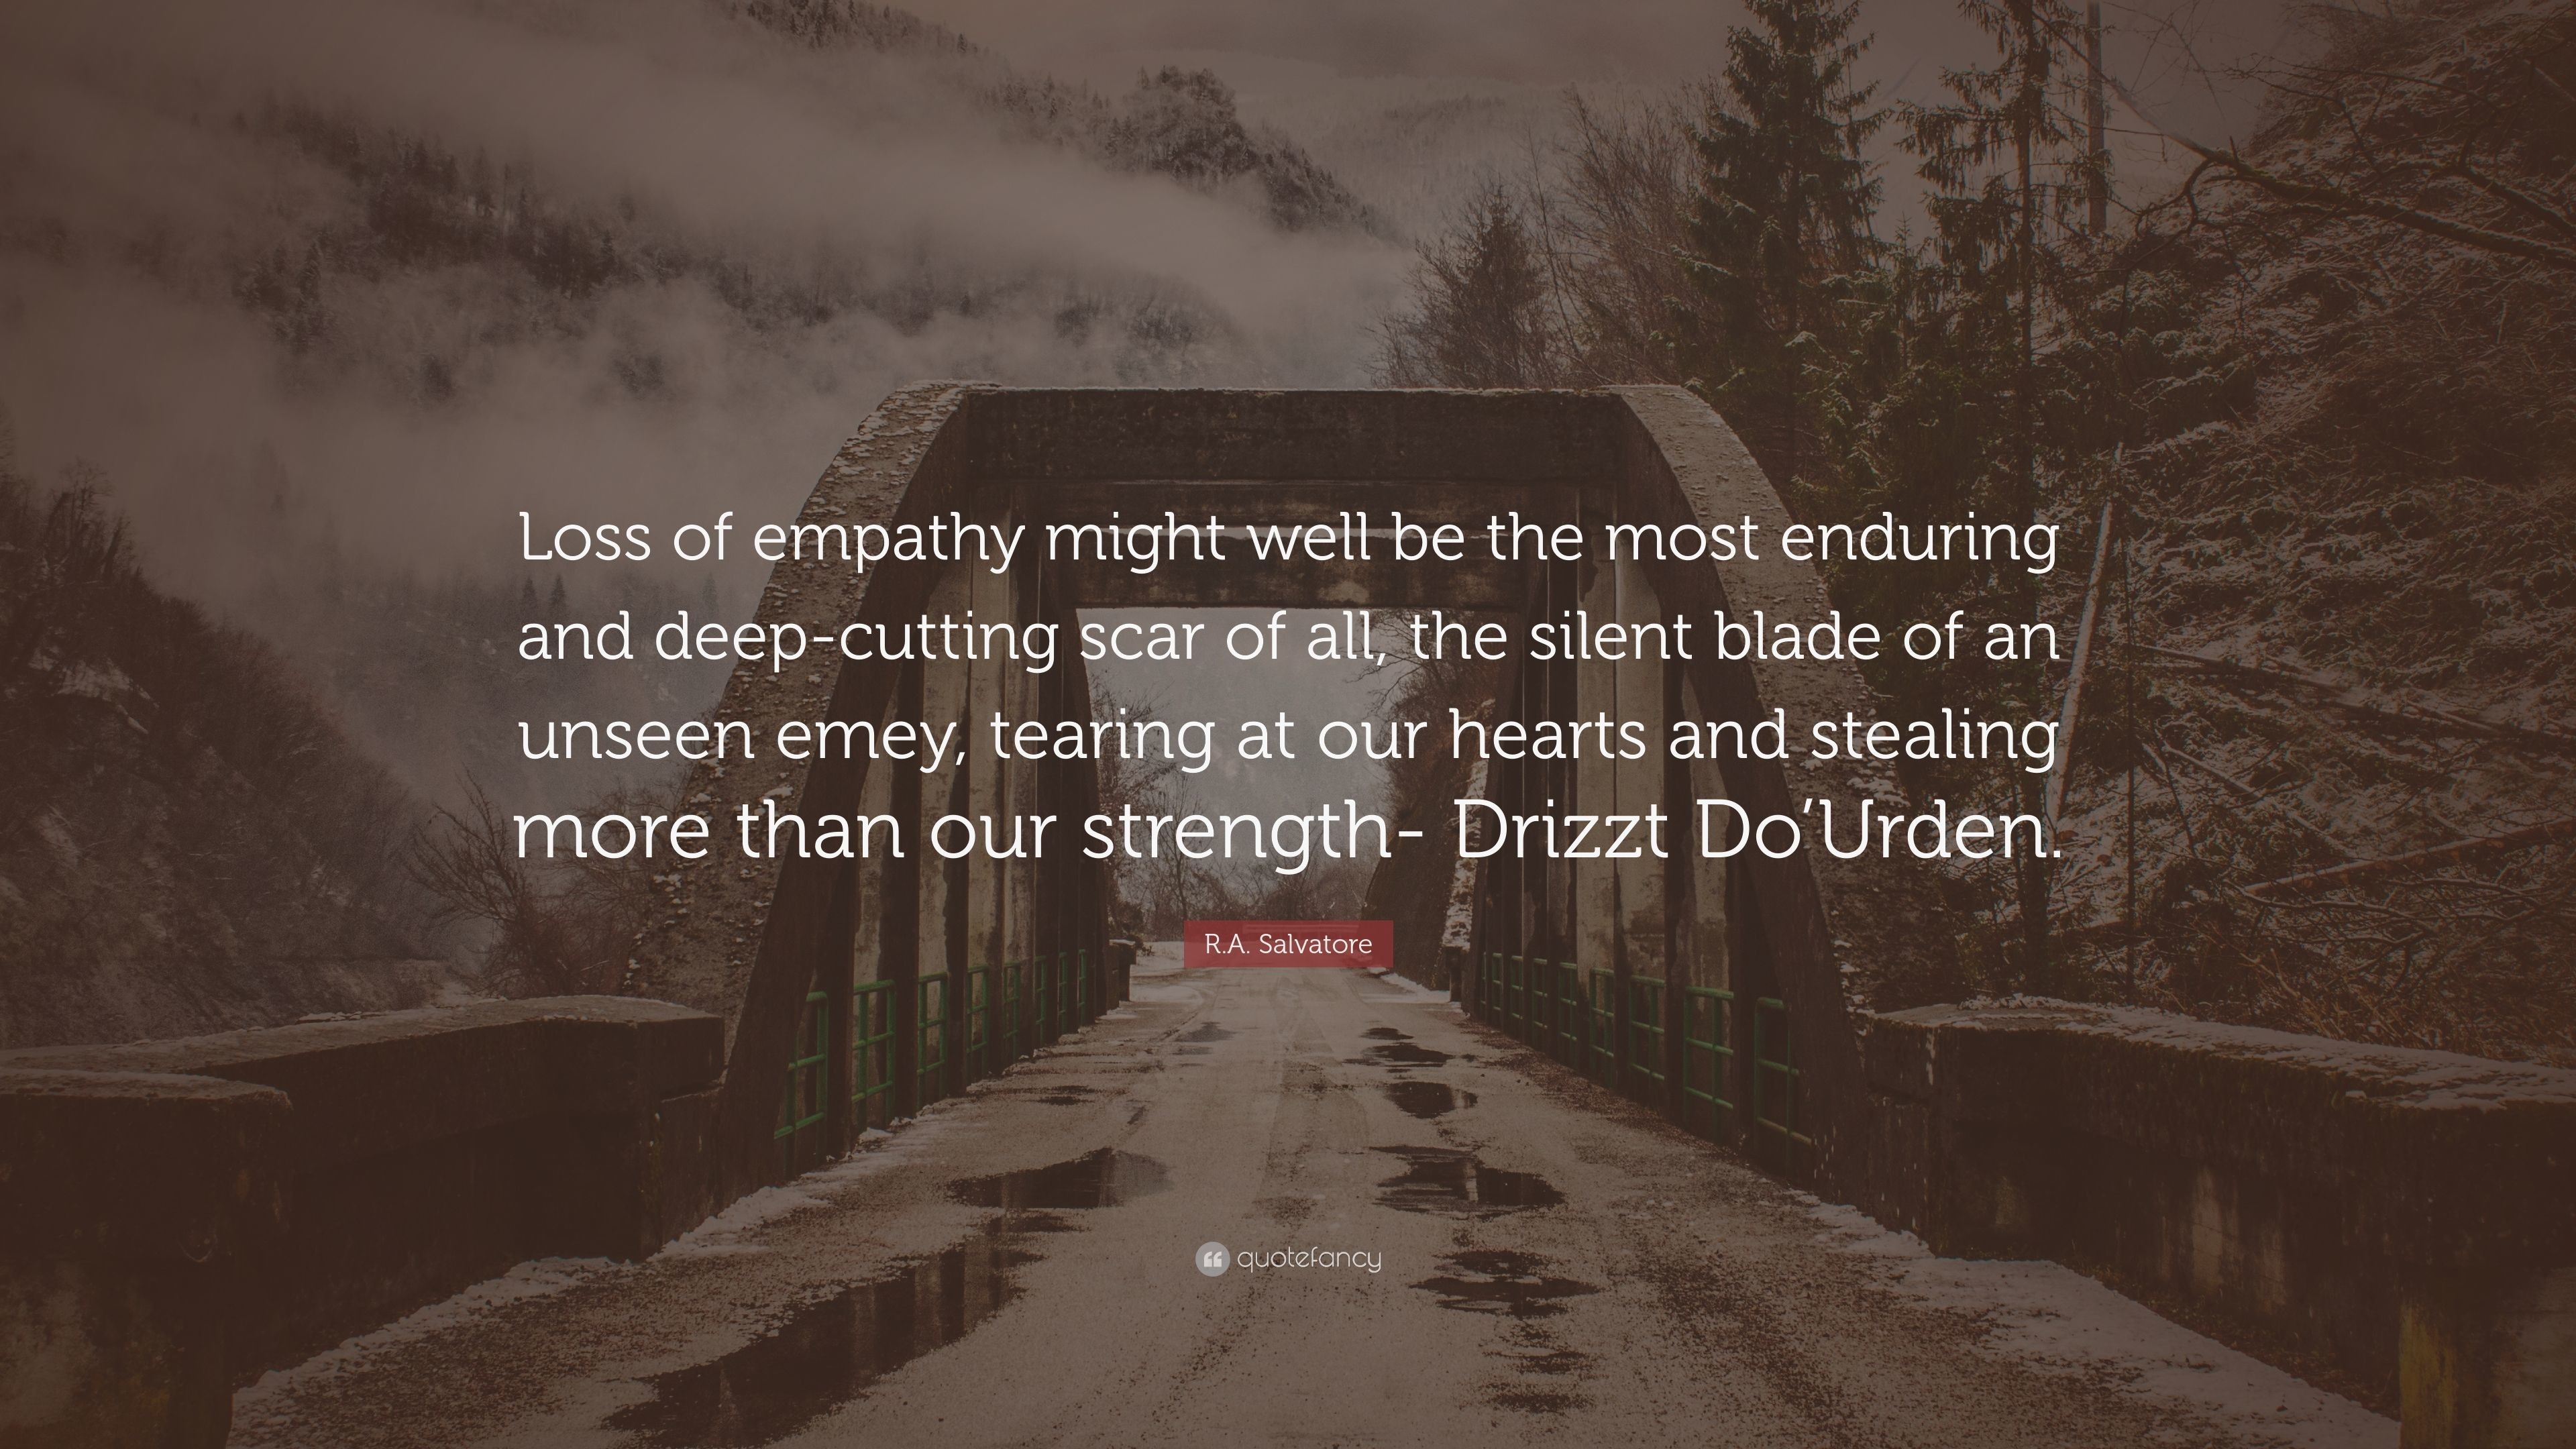 3840x2160 R.A. Salvatore Quote: “Loss of empathy might well be the most enduring and  deep